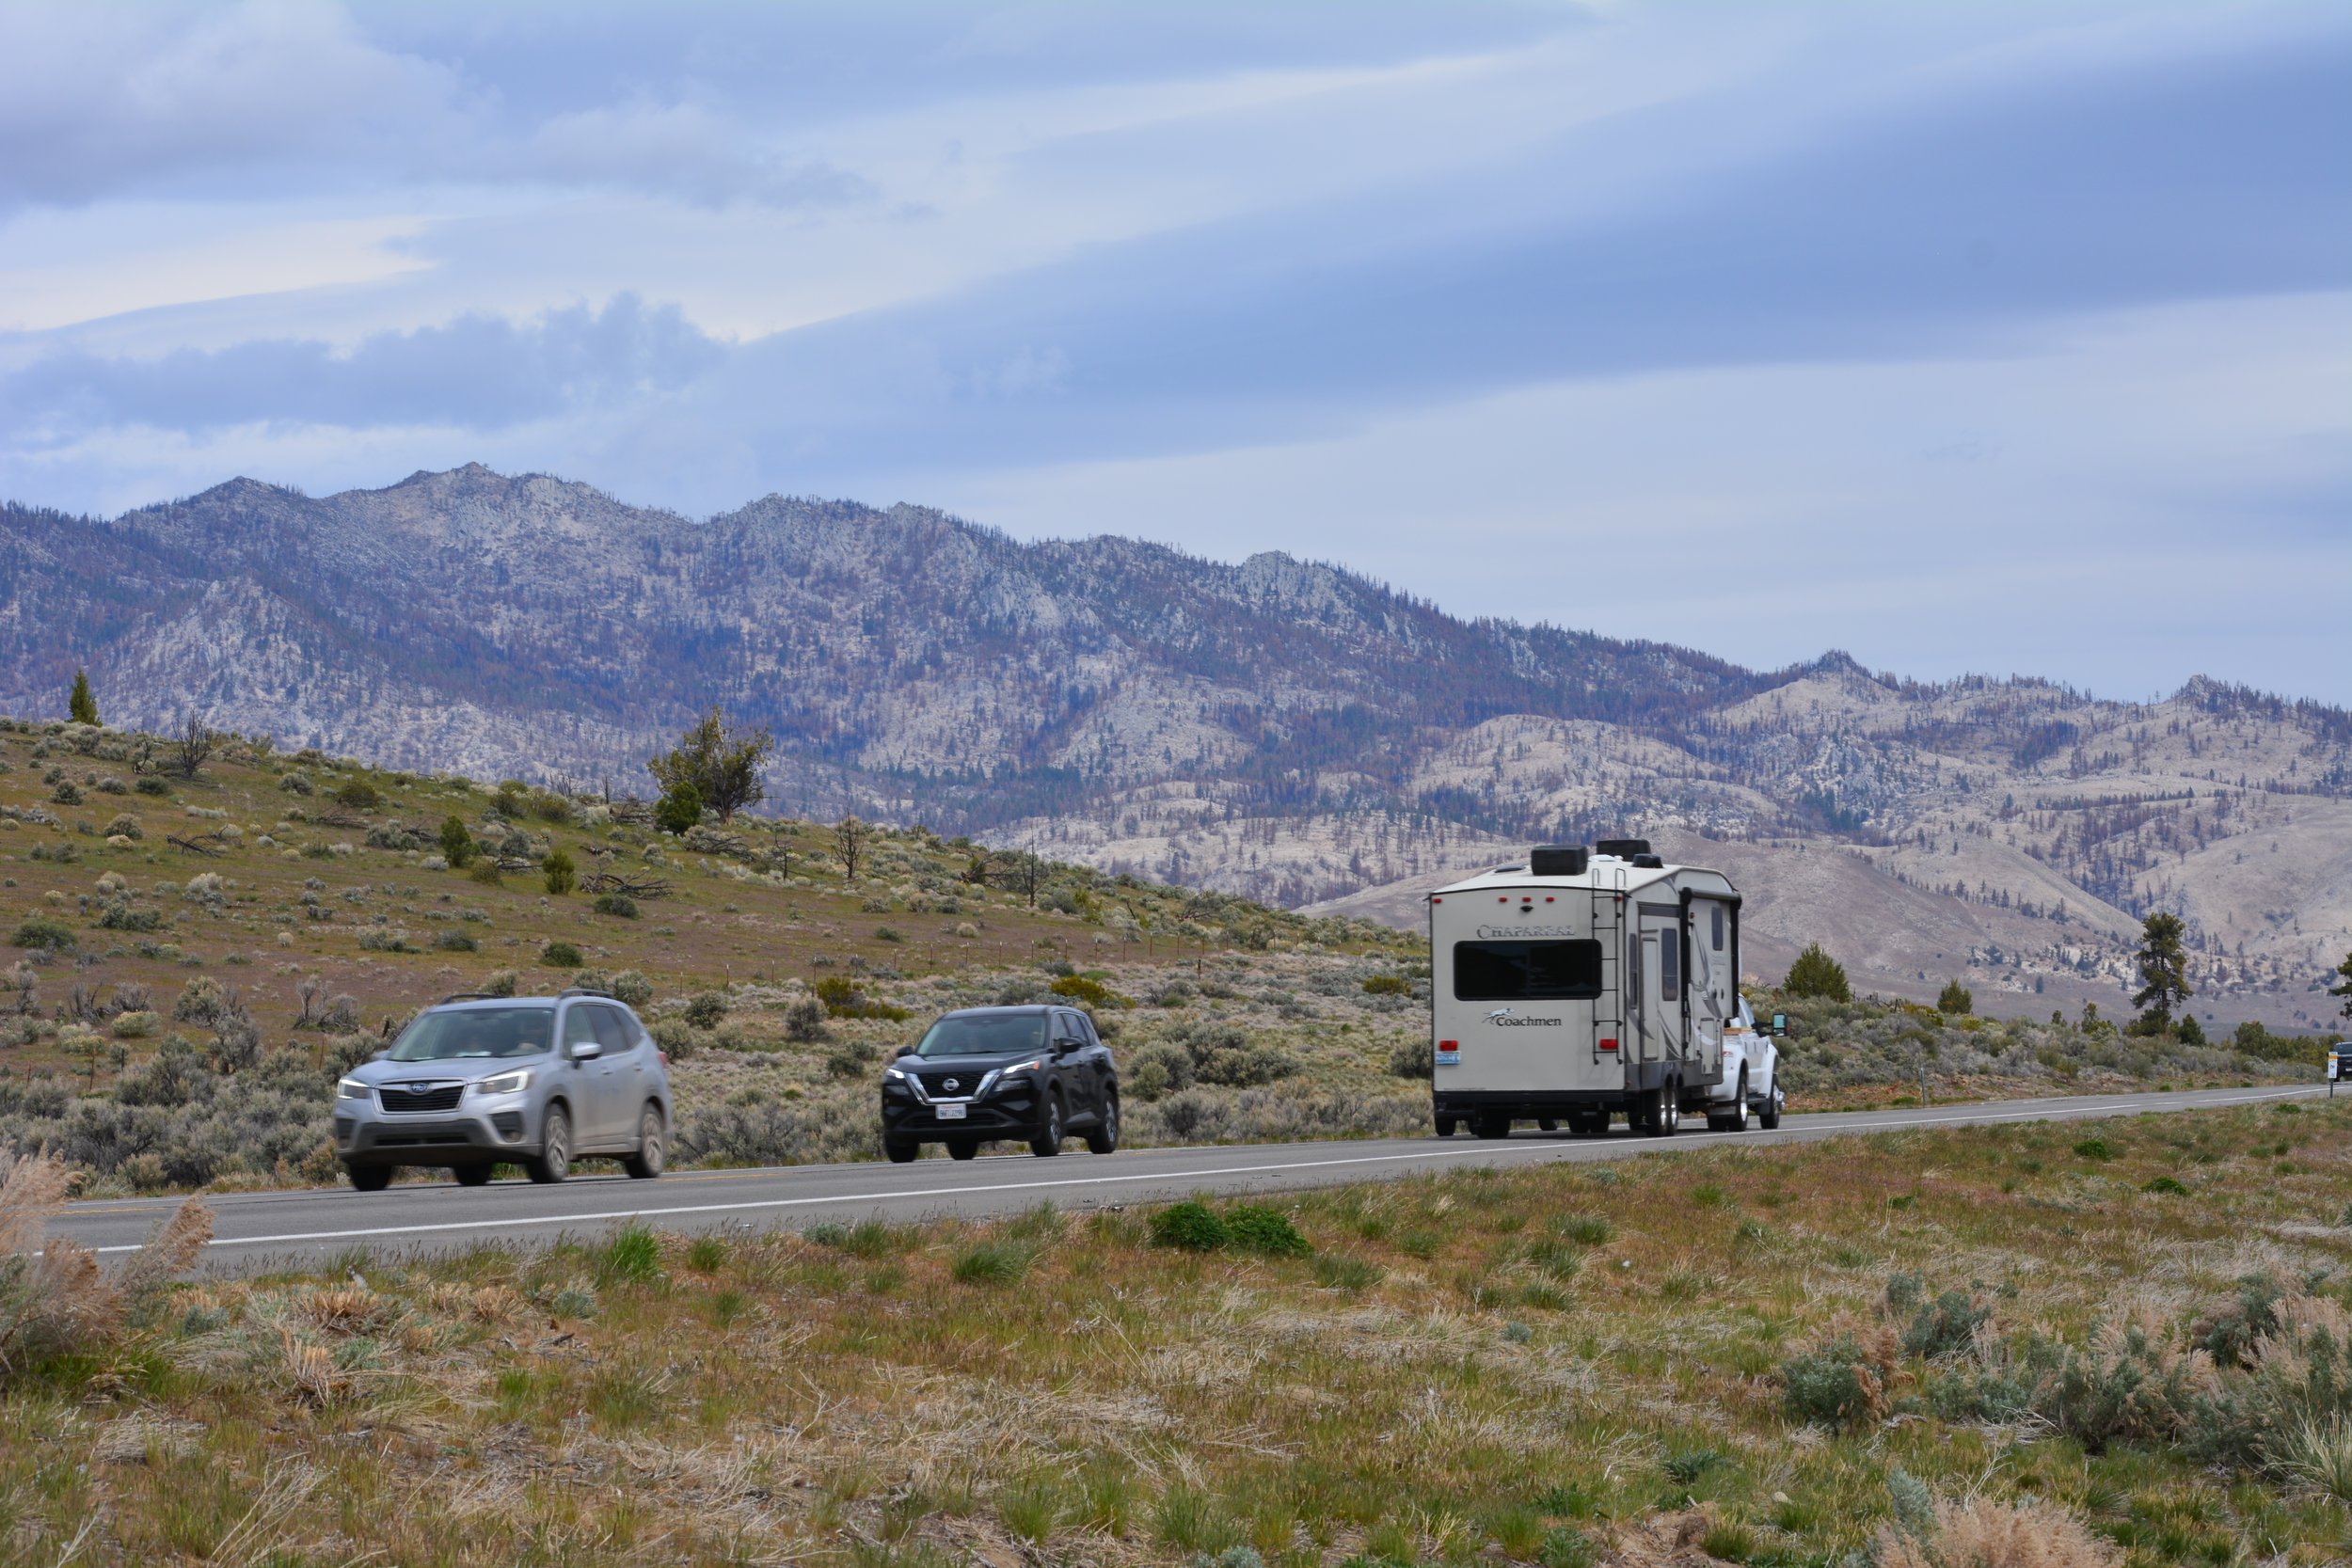  The section of Highway 395 that runs from the California-Nevada border to Honey Lake is an important transportation corridor in the Eastern Sierra and frequently has wildlife-vehicle collisions. 